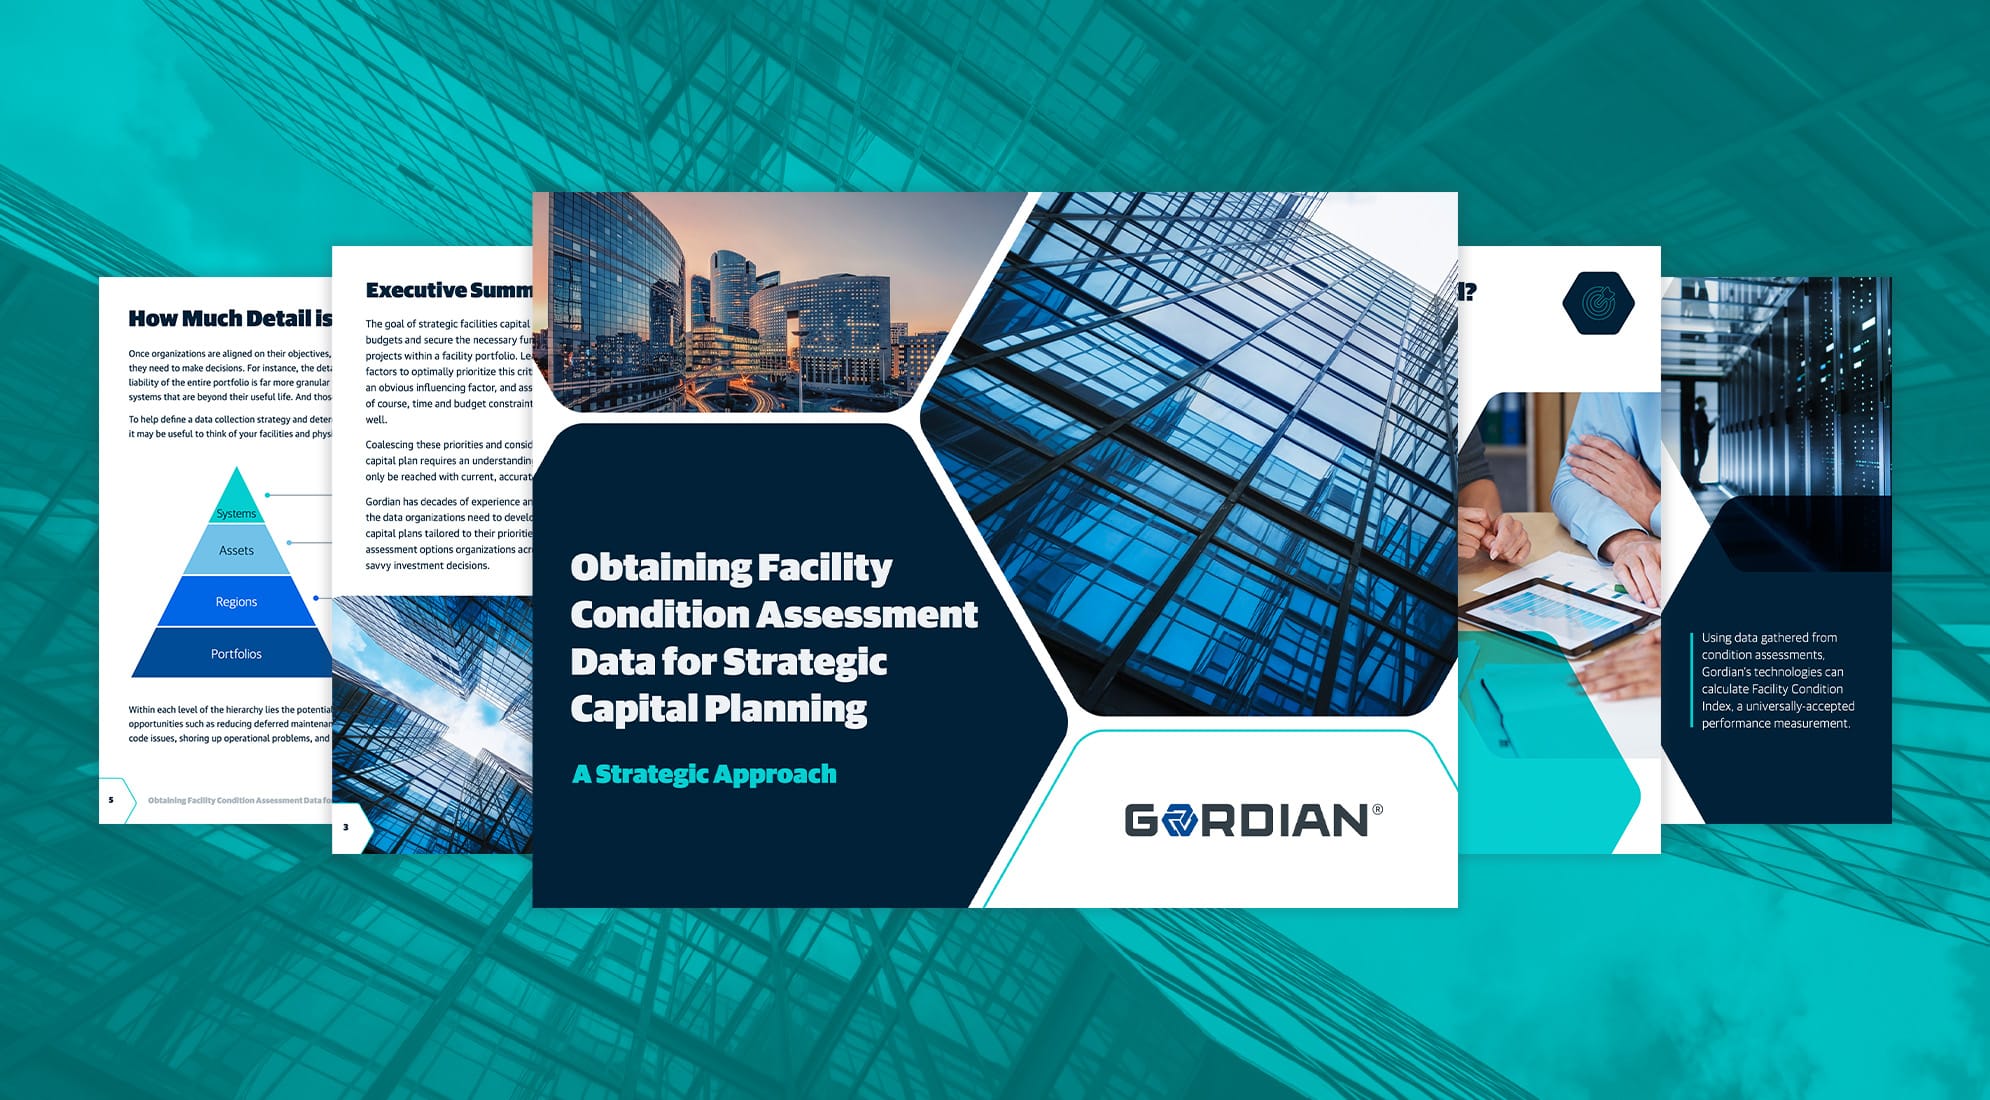 Obtaining Facility Condition Assessment Data for Strategic Capital Planning 5